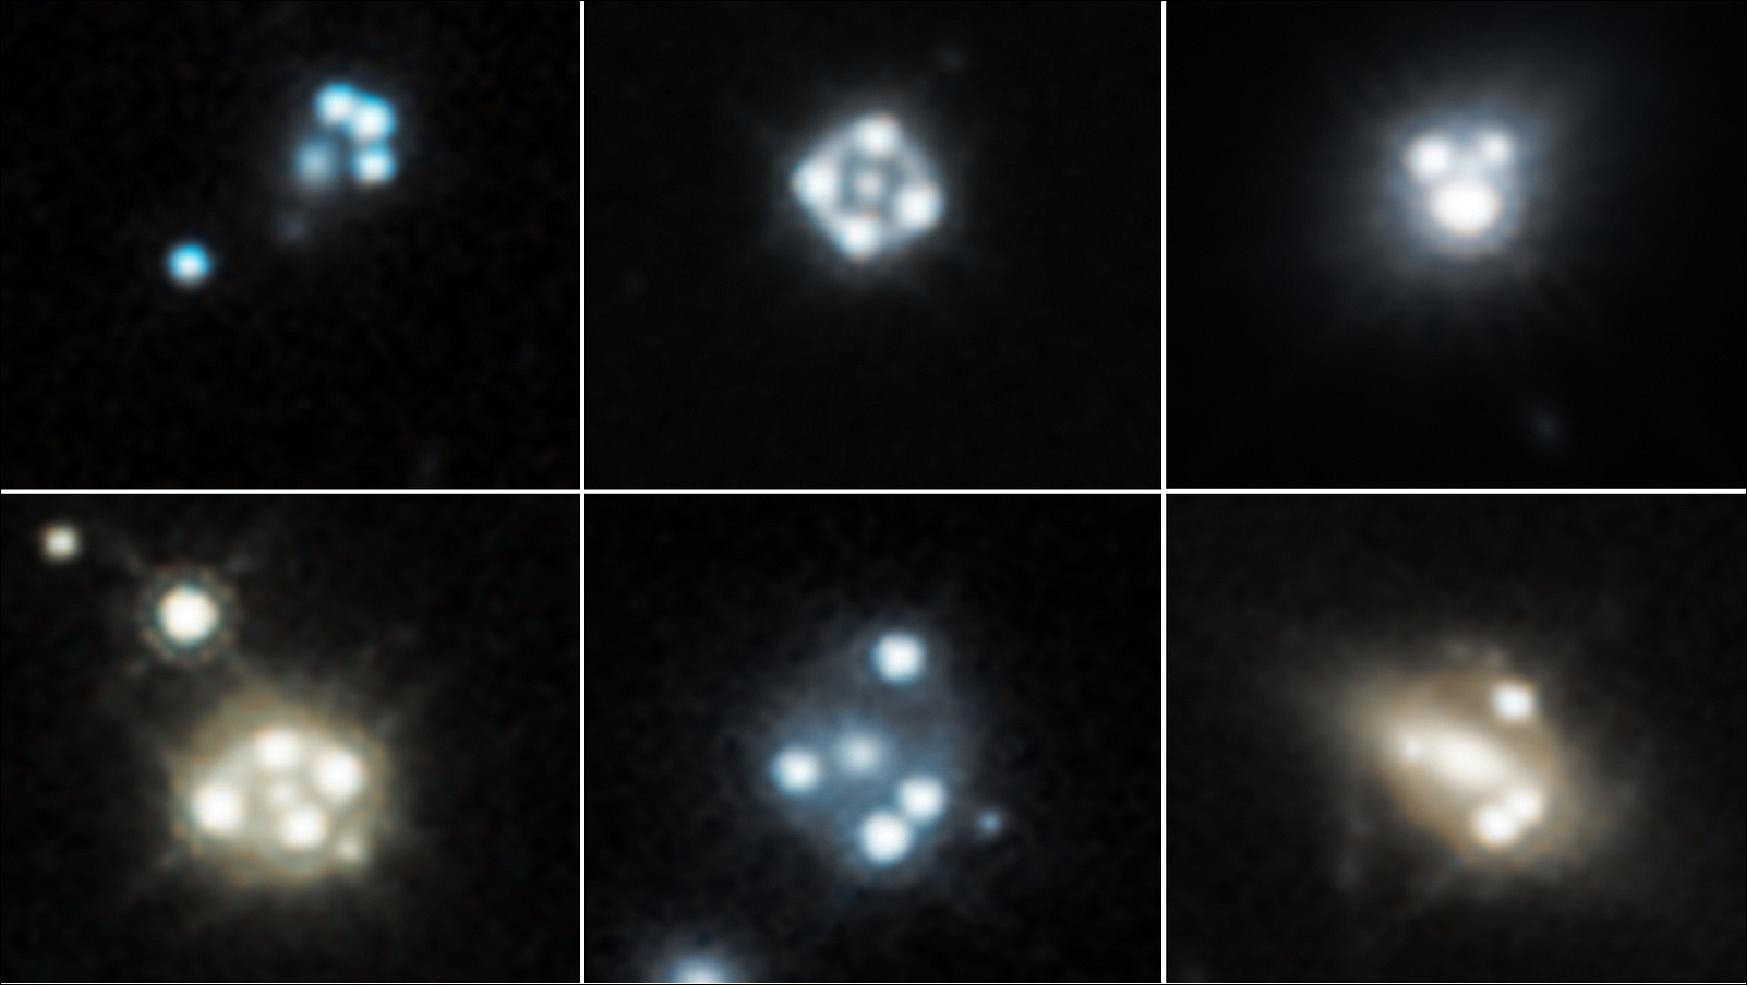 Figure 91: Each snapshot shows four distorted images of a background quasar (an extremely bright region in the center of some distant galaxies), surrounding the core of a massive foreground galaxy. The gravity of the foreground galaxy magnifies the quasar, an effect called gravitational lensing (image credit: NASA, ESA, A. Nierenberg, T. Treu)